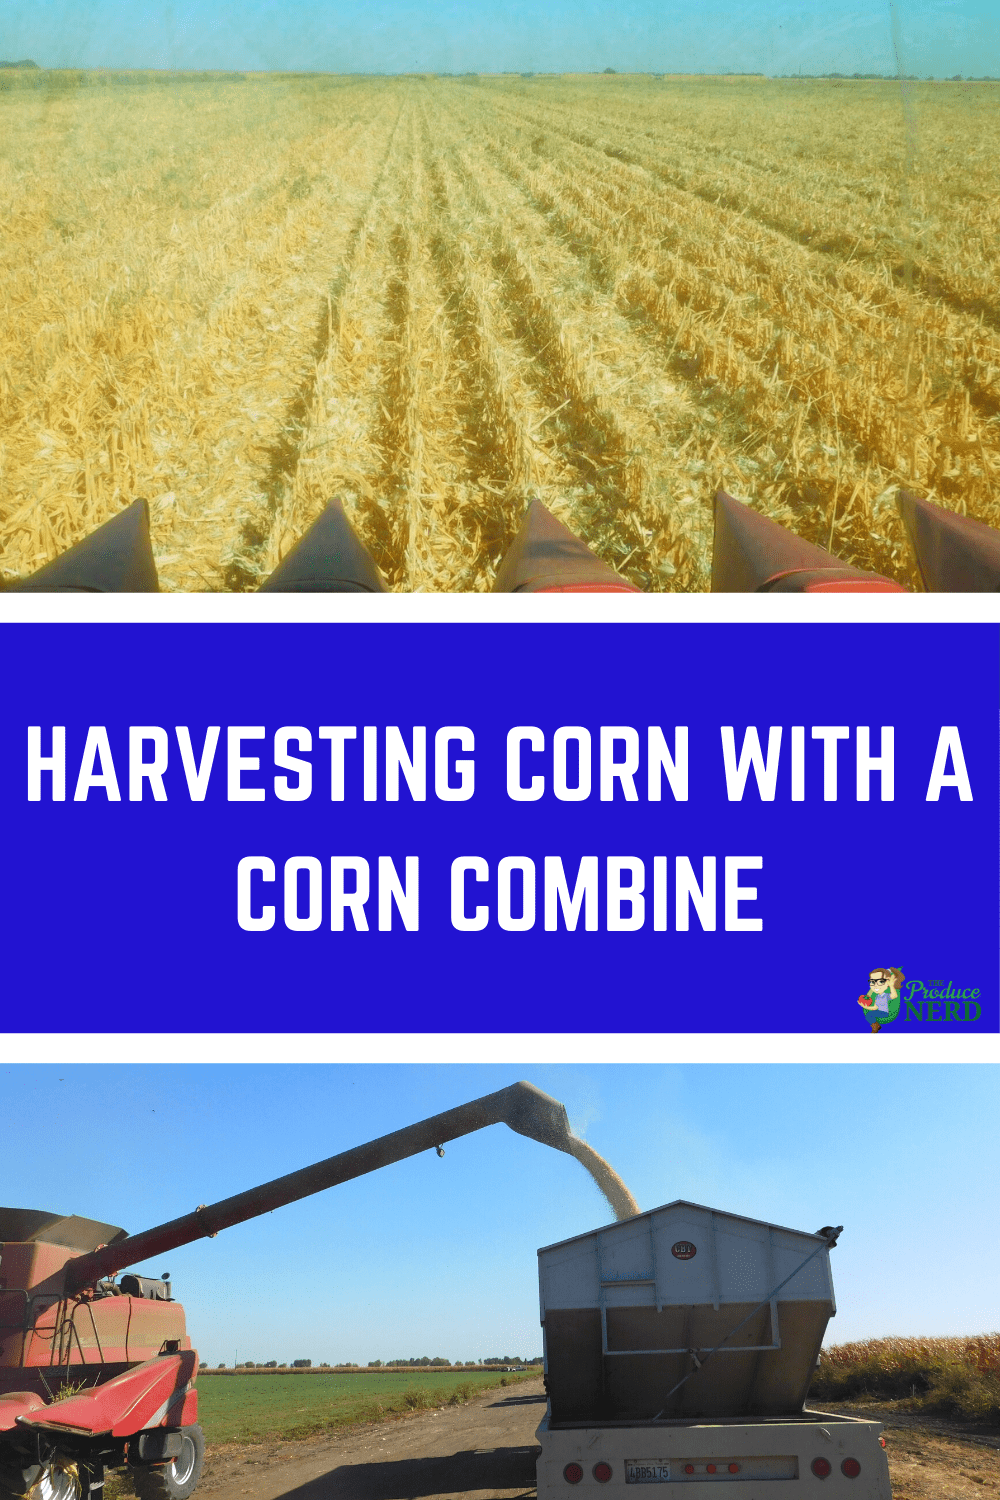 You are currently viewing Harvesting Corn Using a Corn Combine